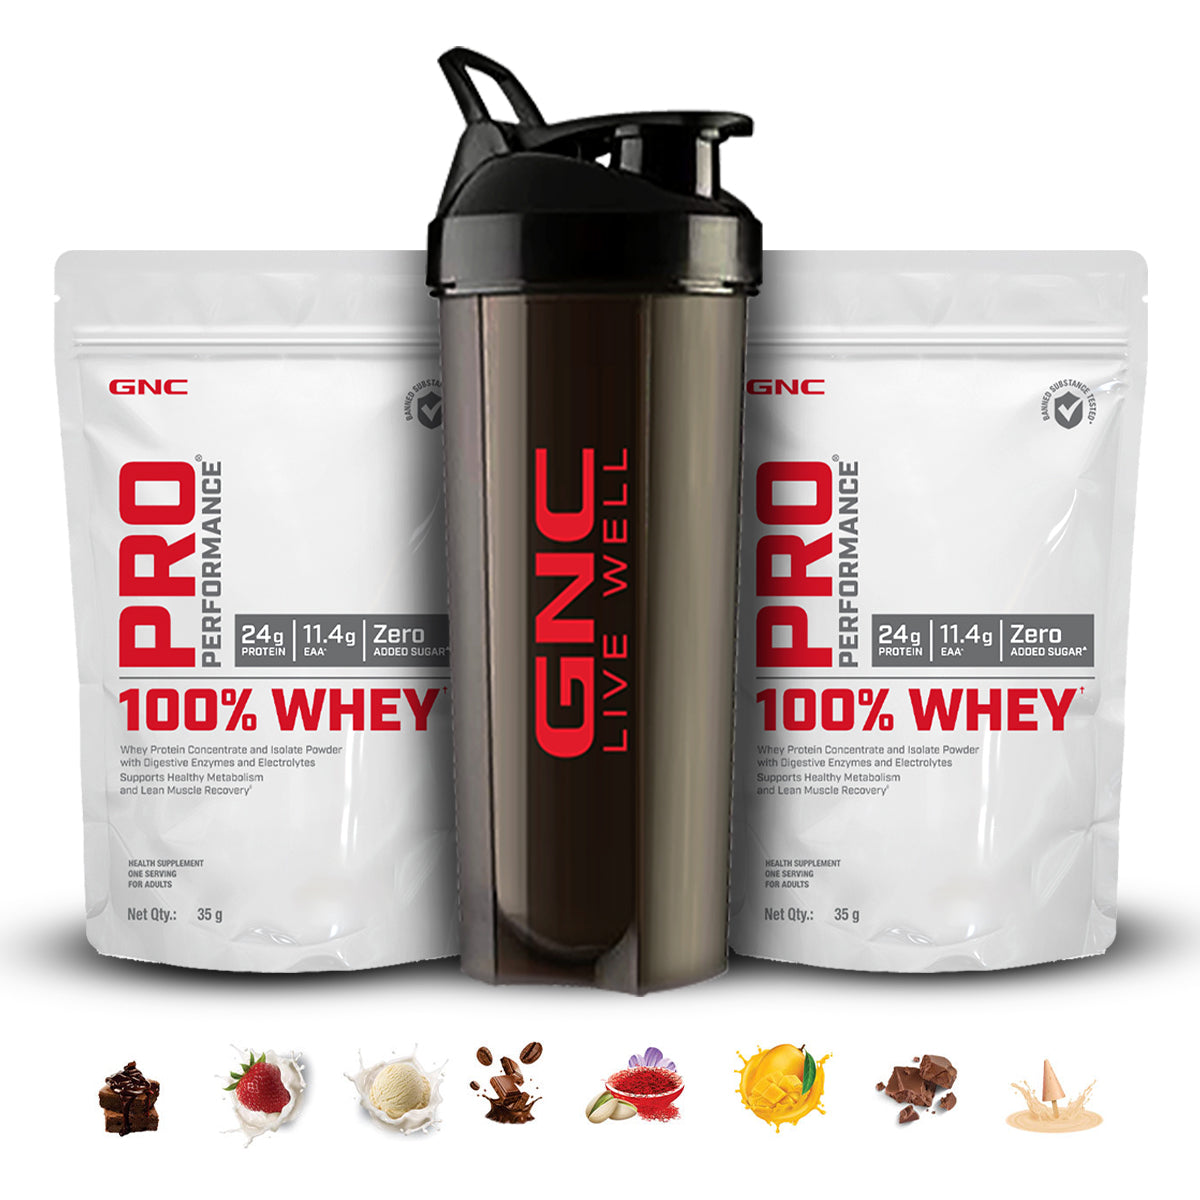 GNC Pro Performance 100% Whey Protein Sachets 35gm (Pack of 2) + Free Shaker - Faster Recovery & Lean Muscle Gains